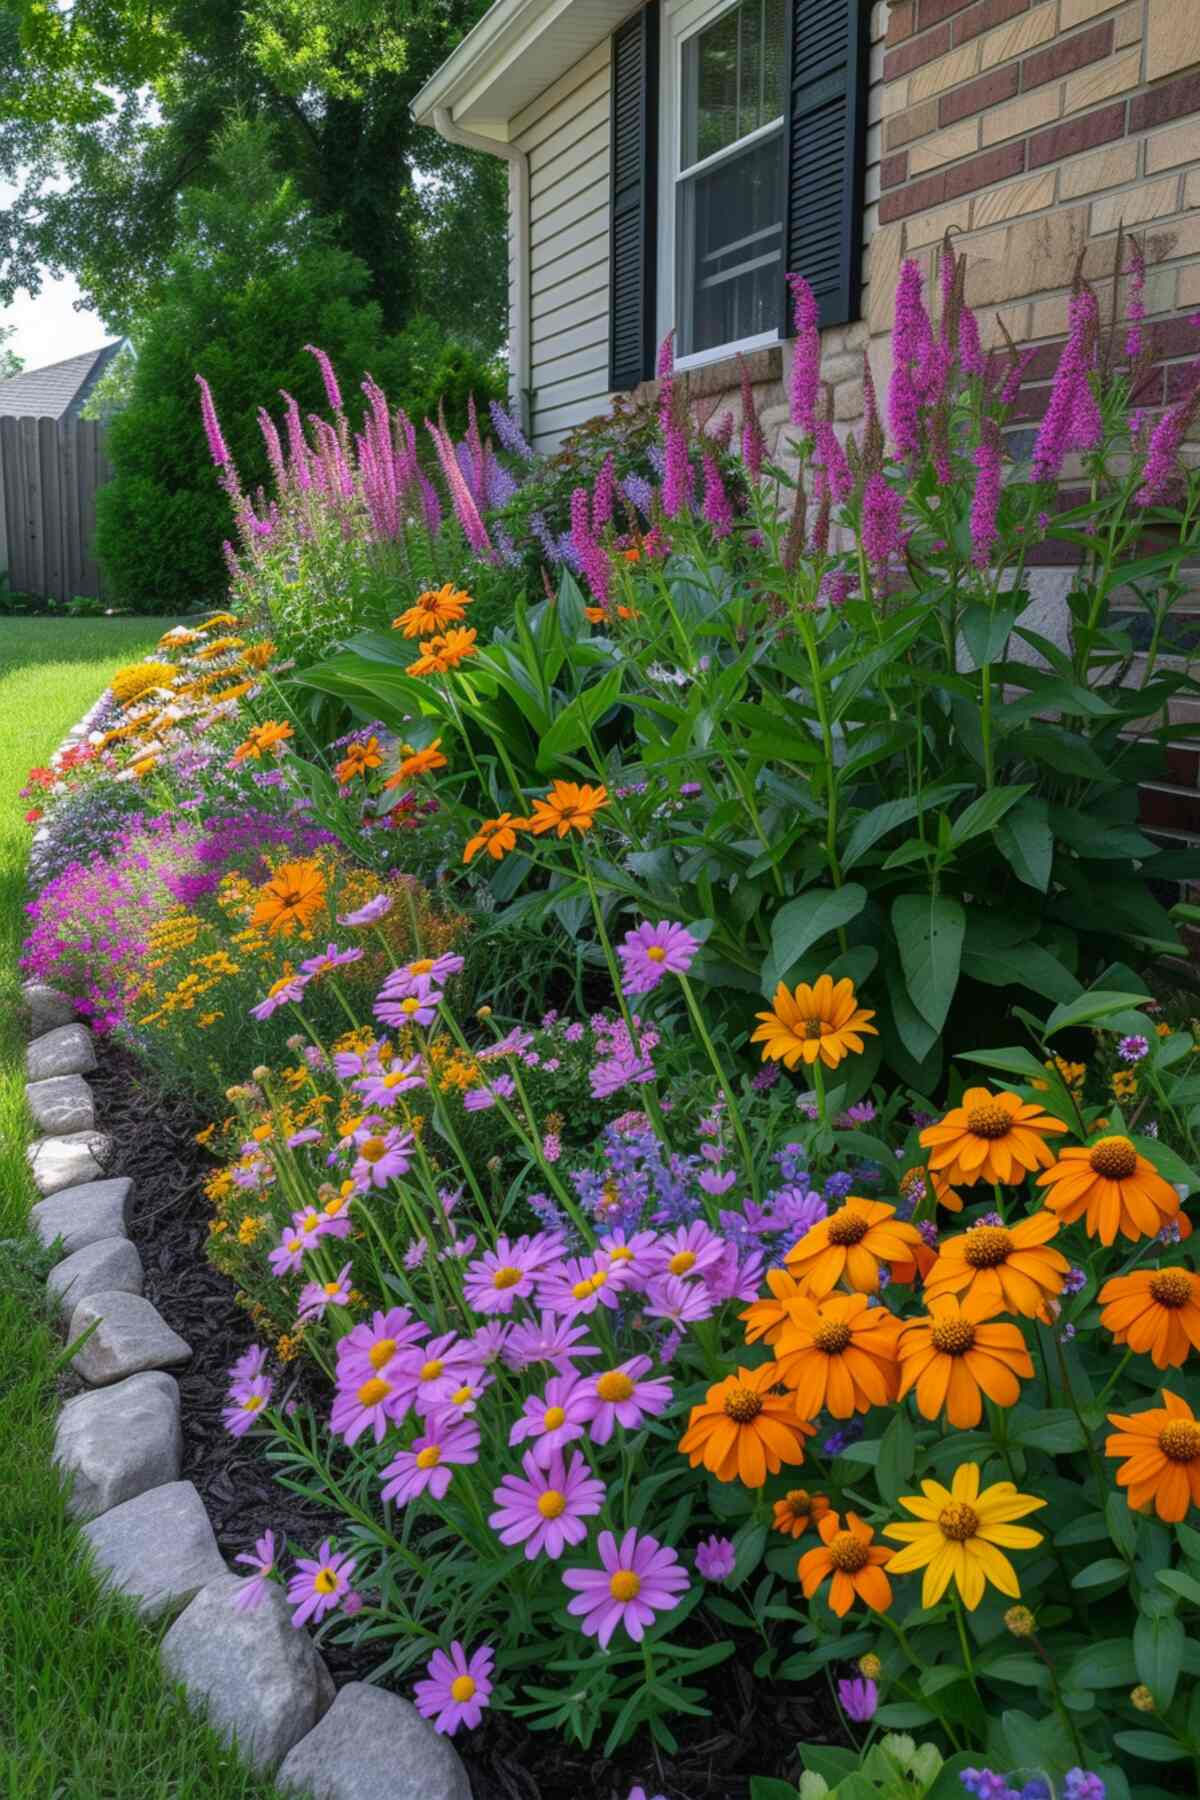 Landscaping ideas to beautify your home